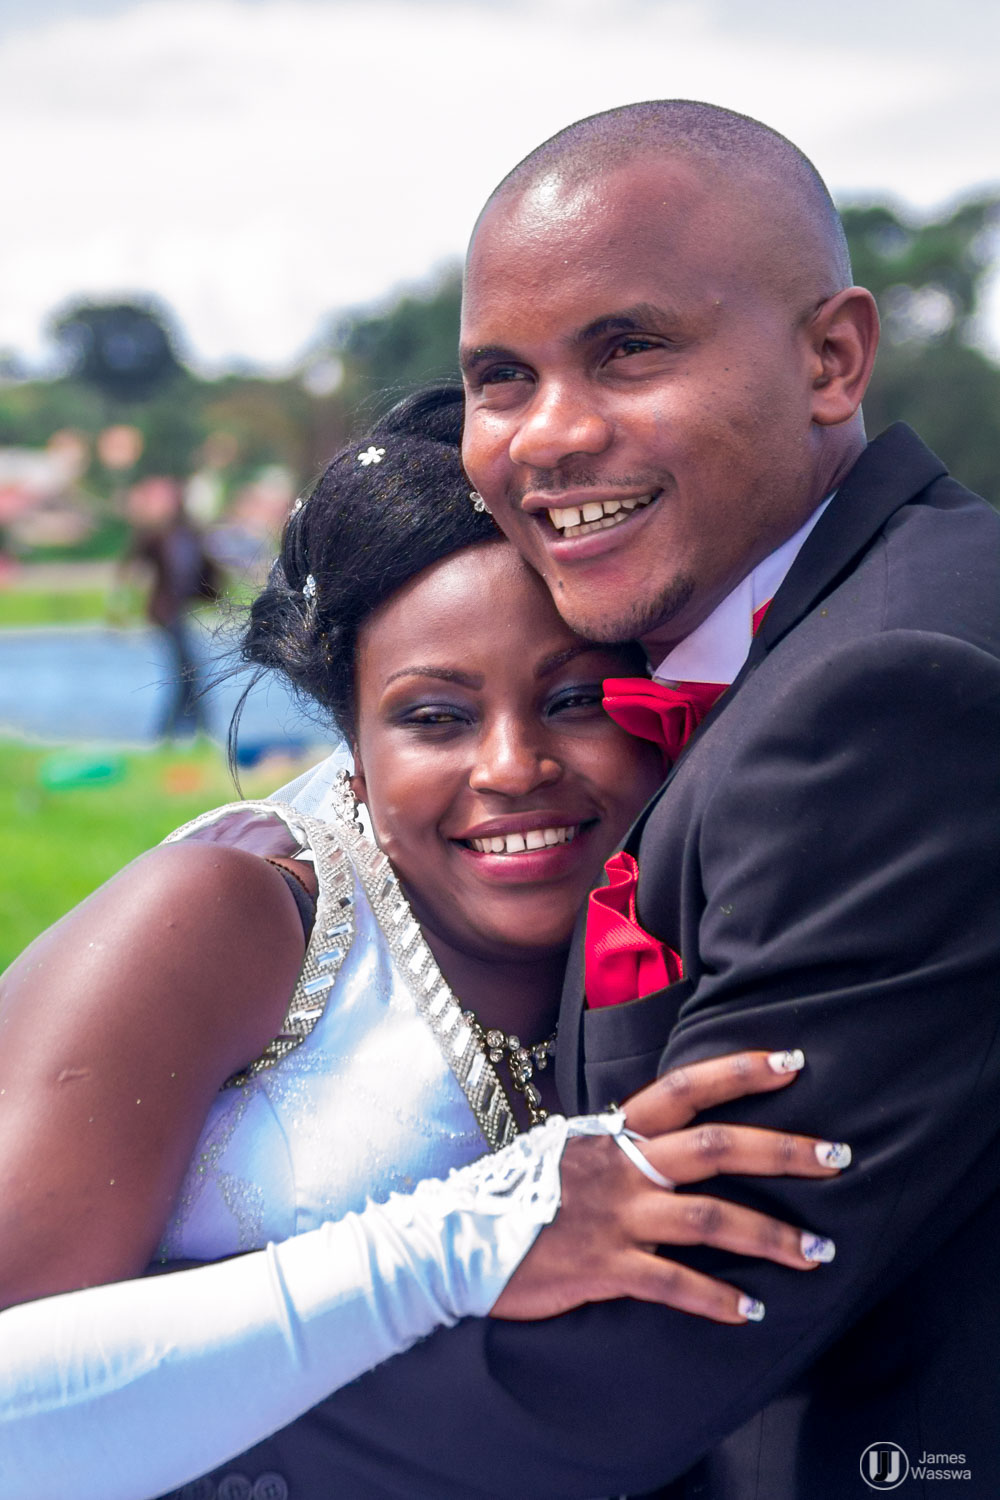 Weddings ugandan wedding ugandan wedding photographer happy moments life celebrations love journeys places Togetherness